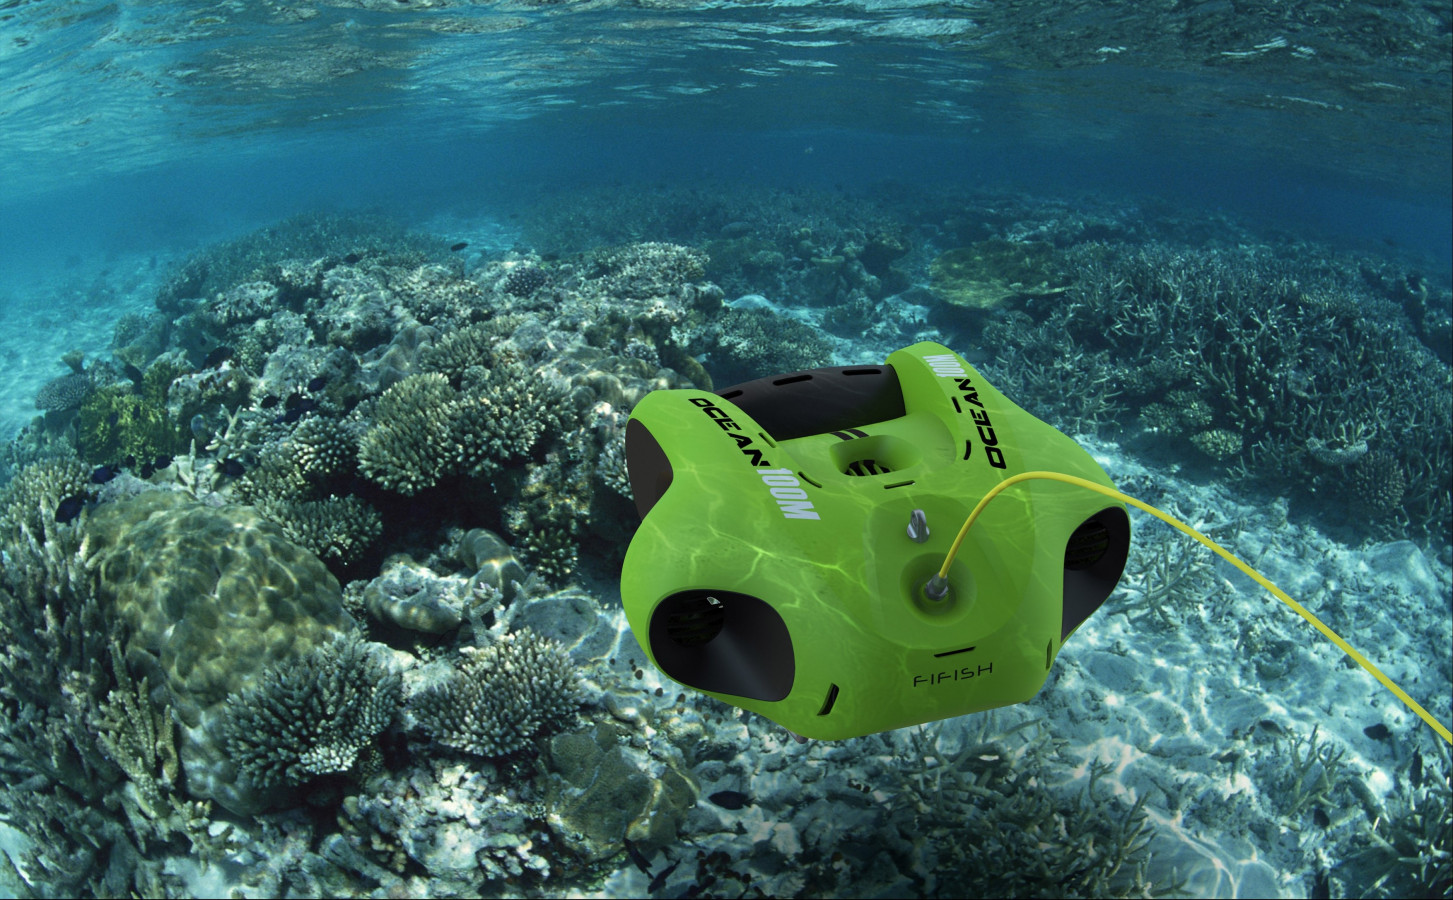 Meet some of the best underwater drones coming out China ...